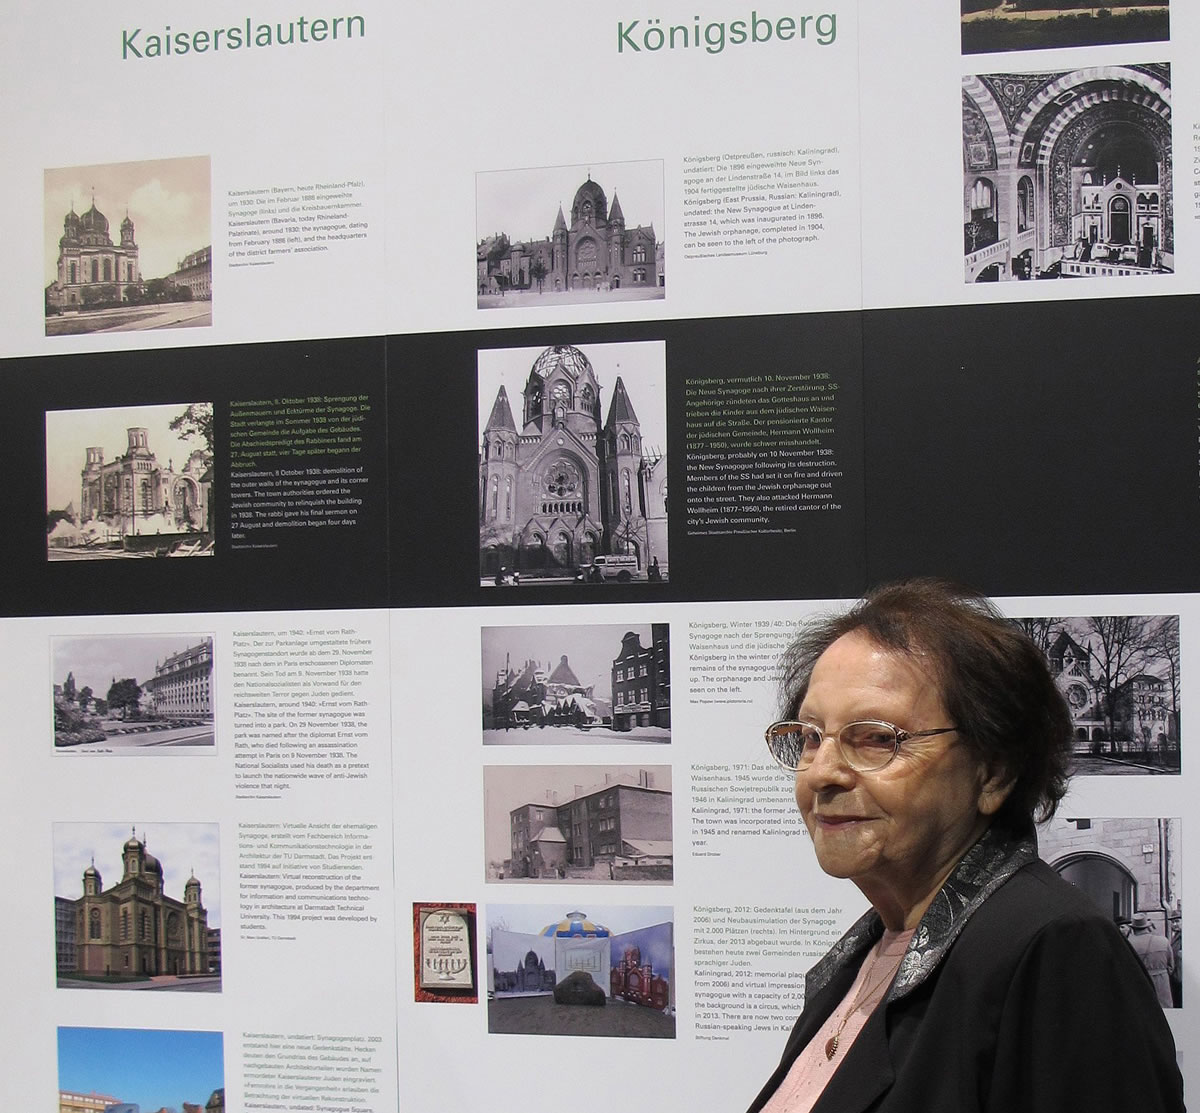 In 1938, Nechama Drober, a German Jew, looked out her bedroom window in the medieval port city of Koenigberg to see her synagogue in flames.